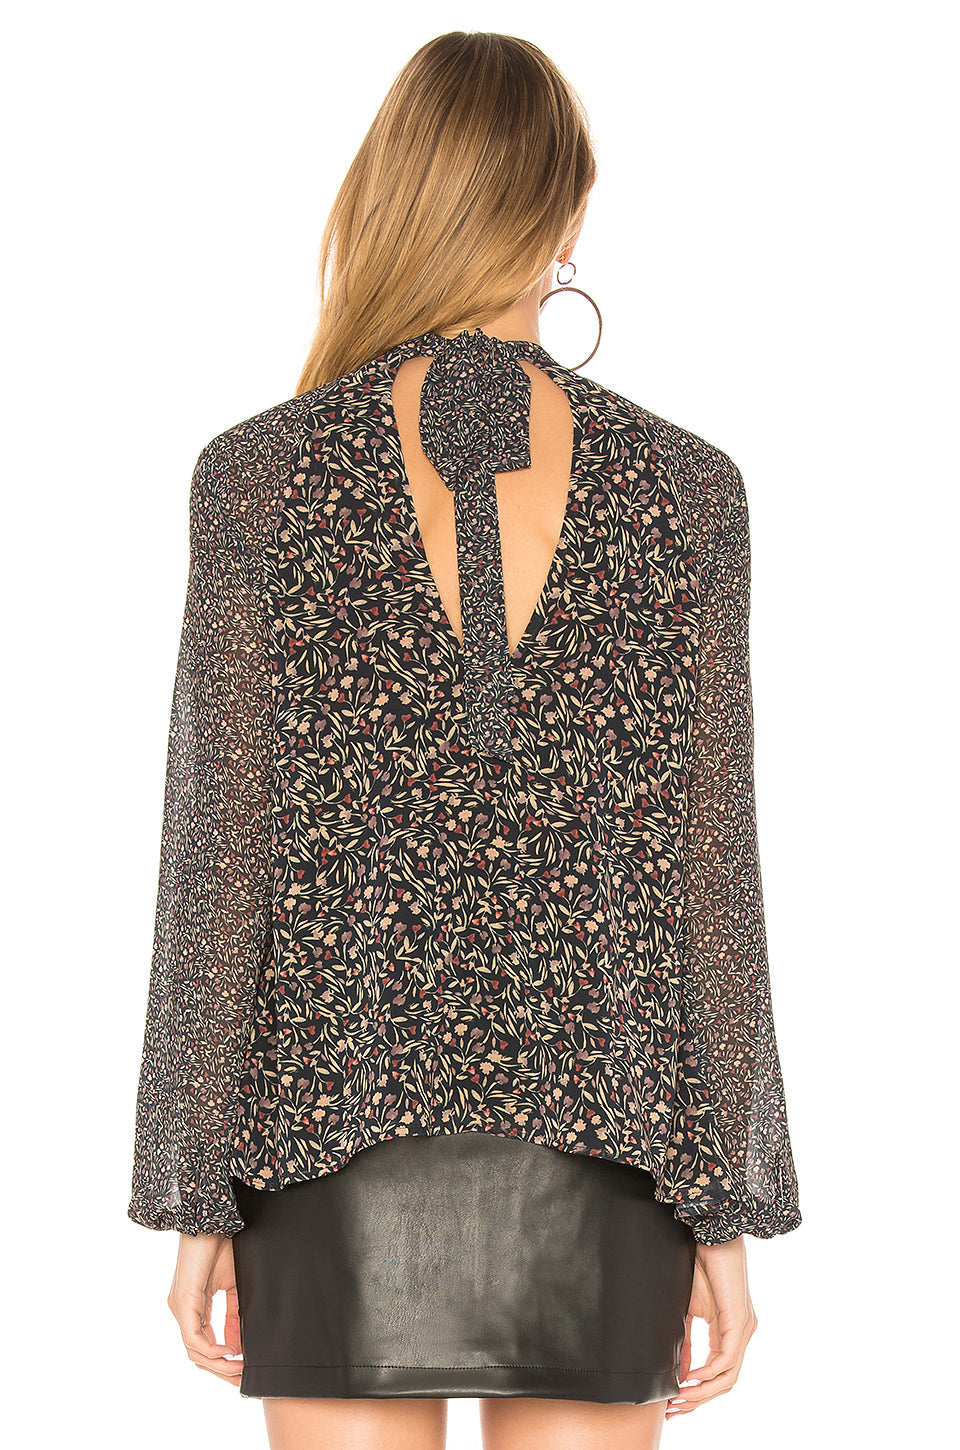 Evie Blouse in MIXED FLORAL